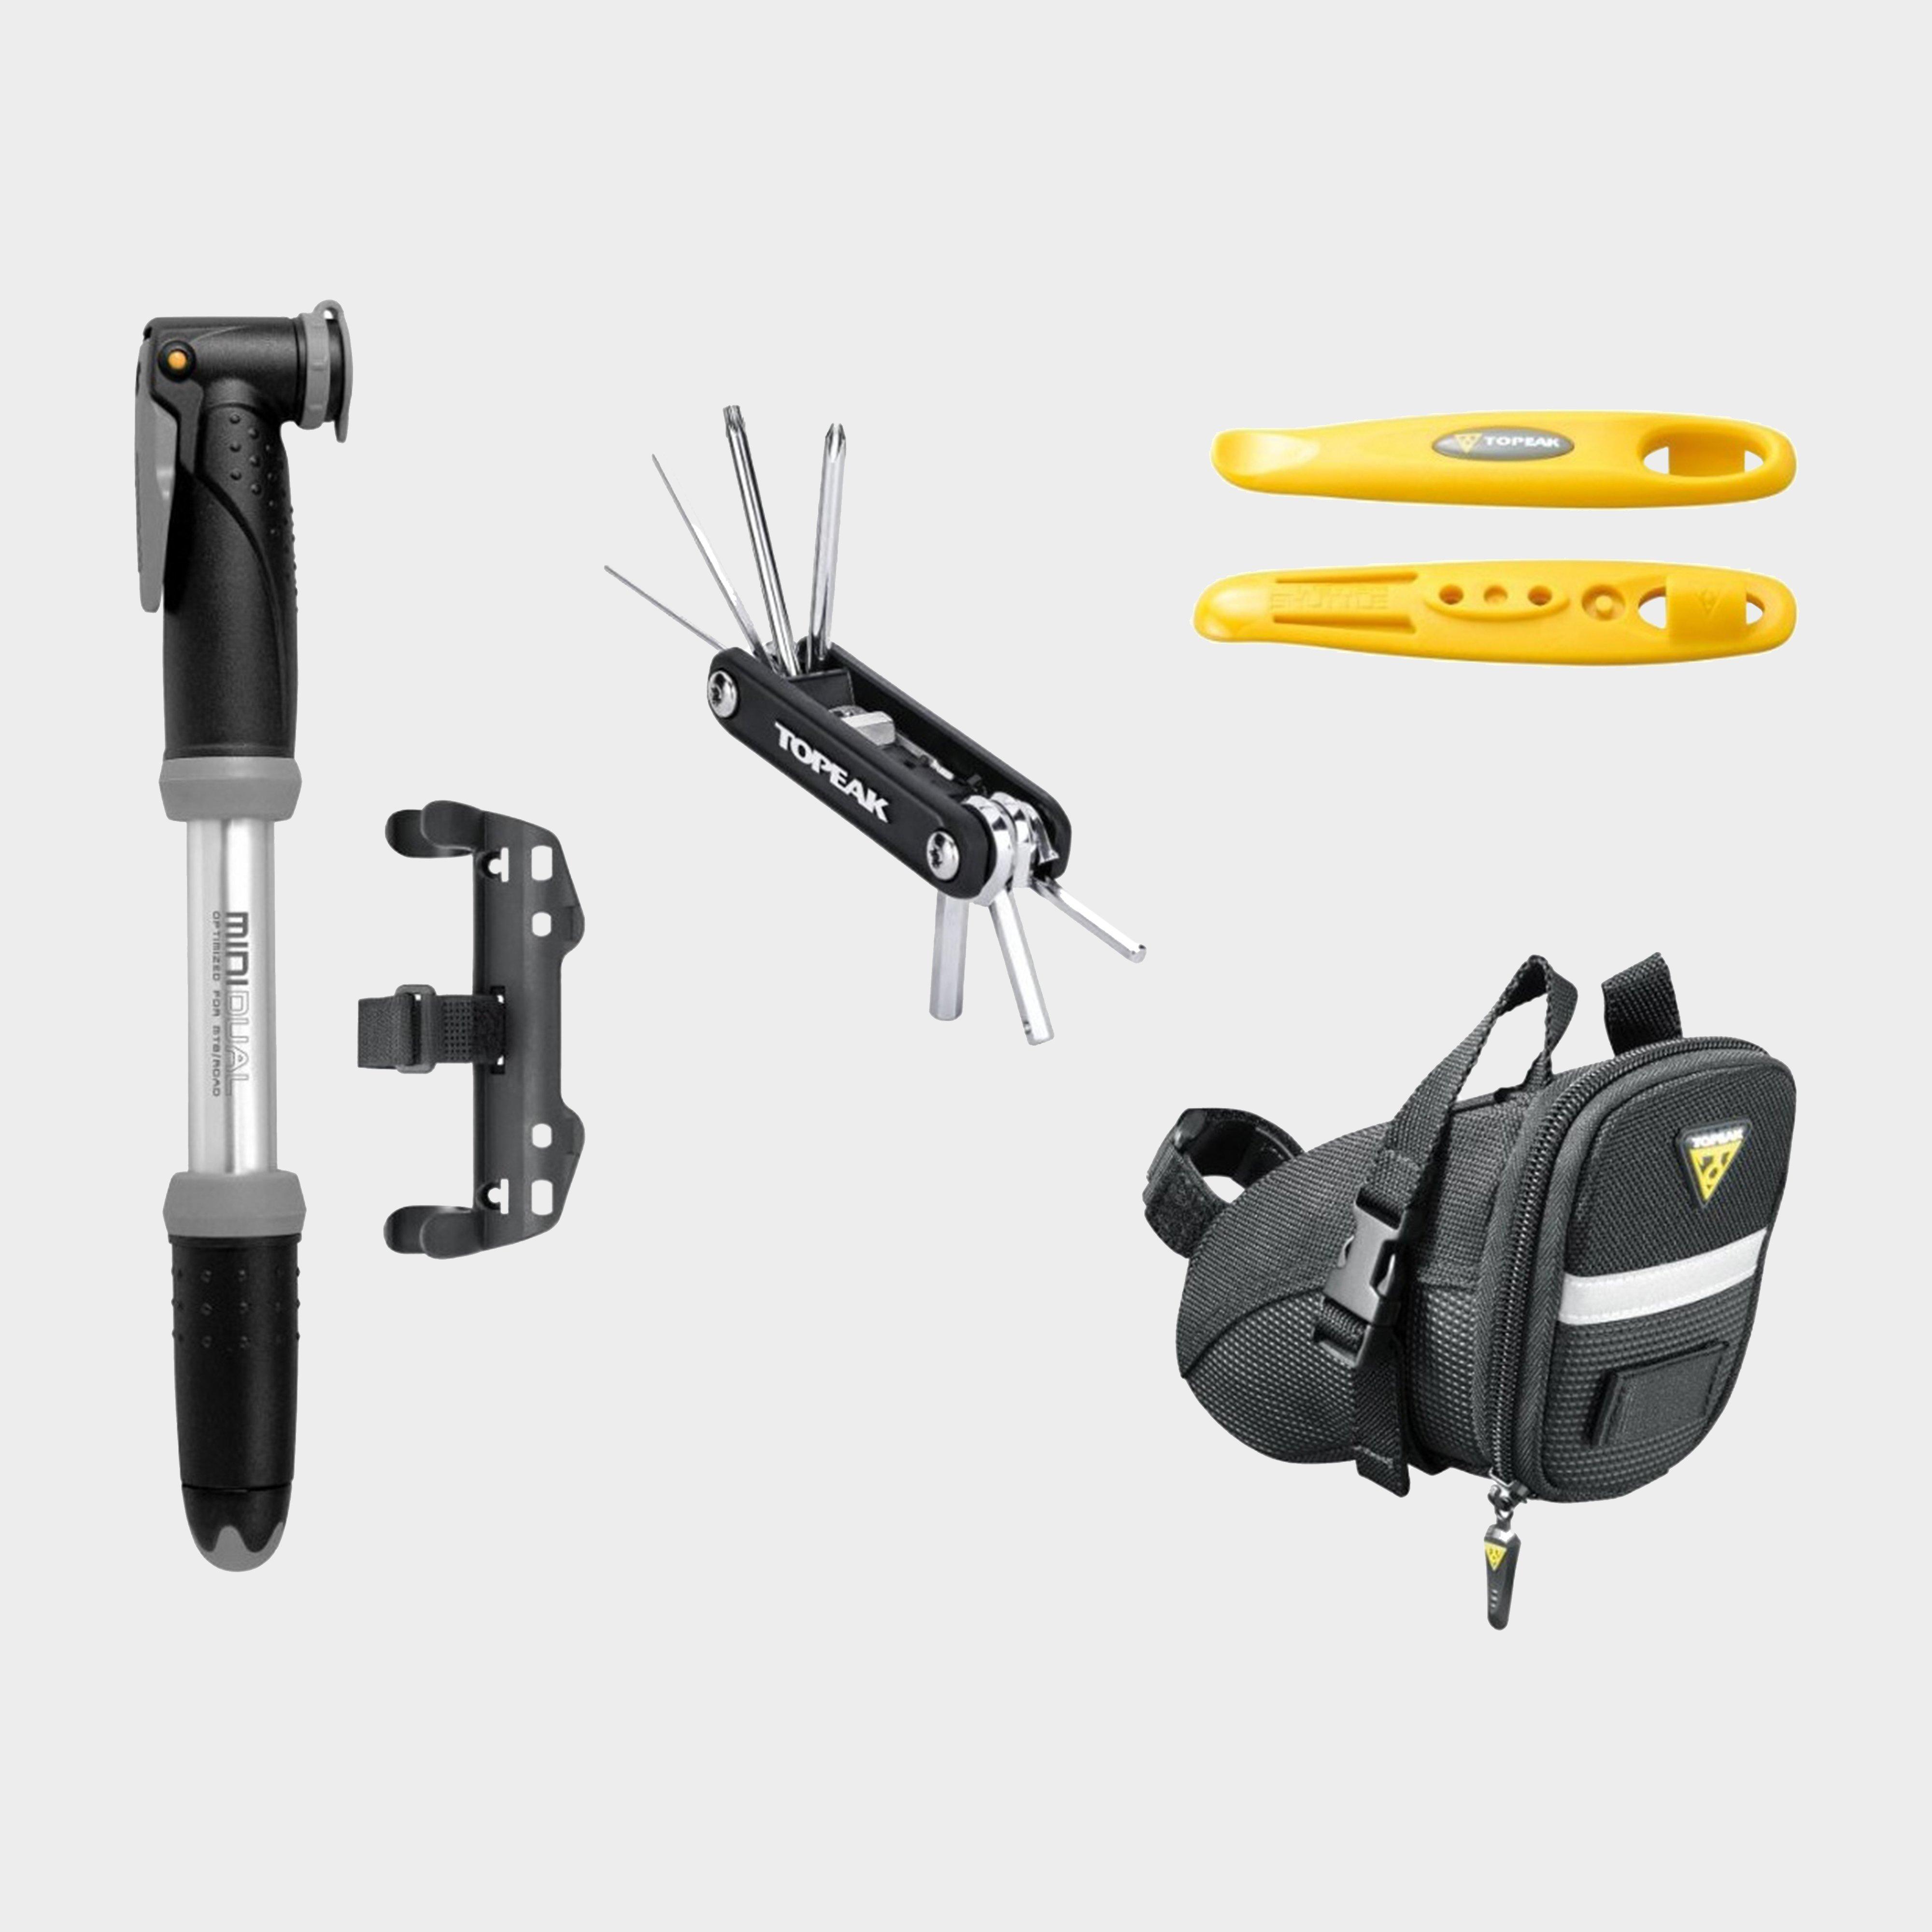  Topeak Deluxe Cycling Accessory Kit, Black